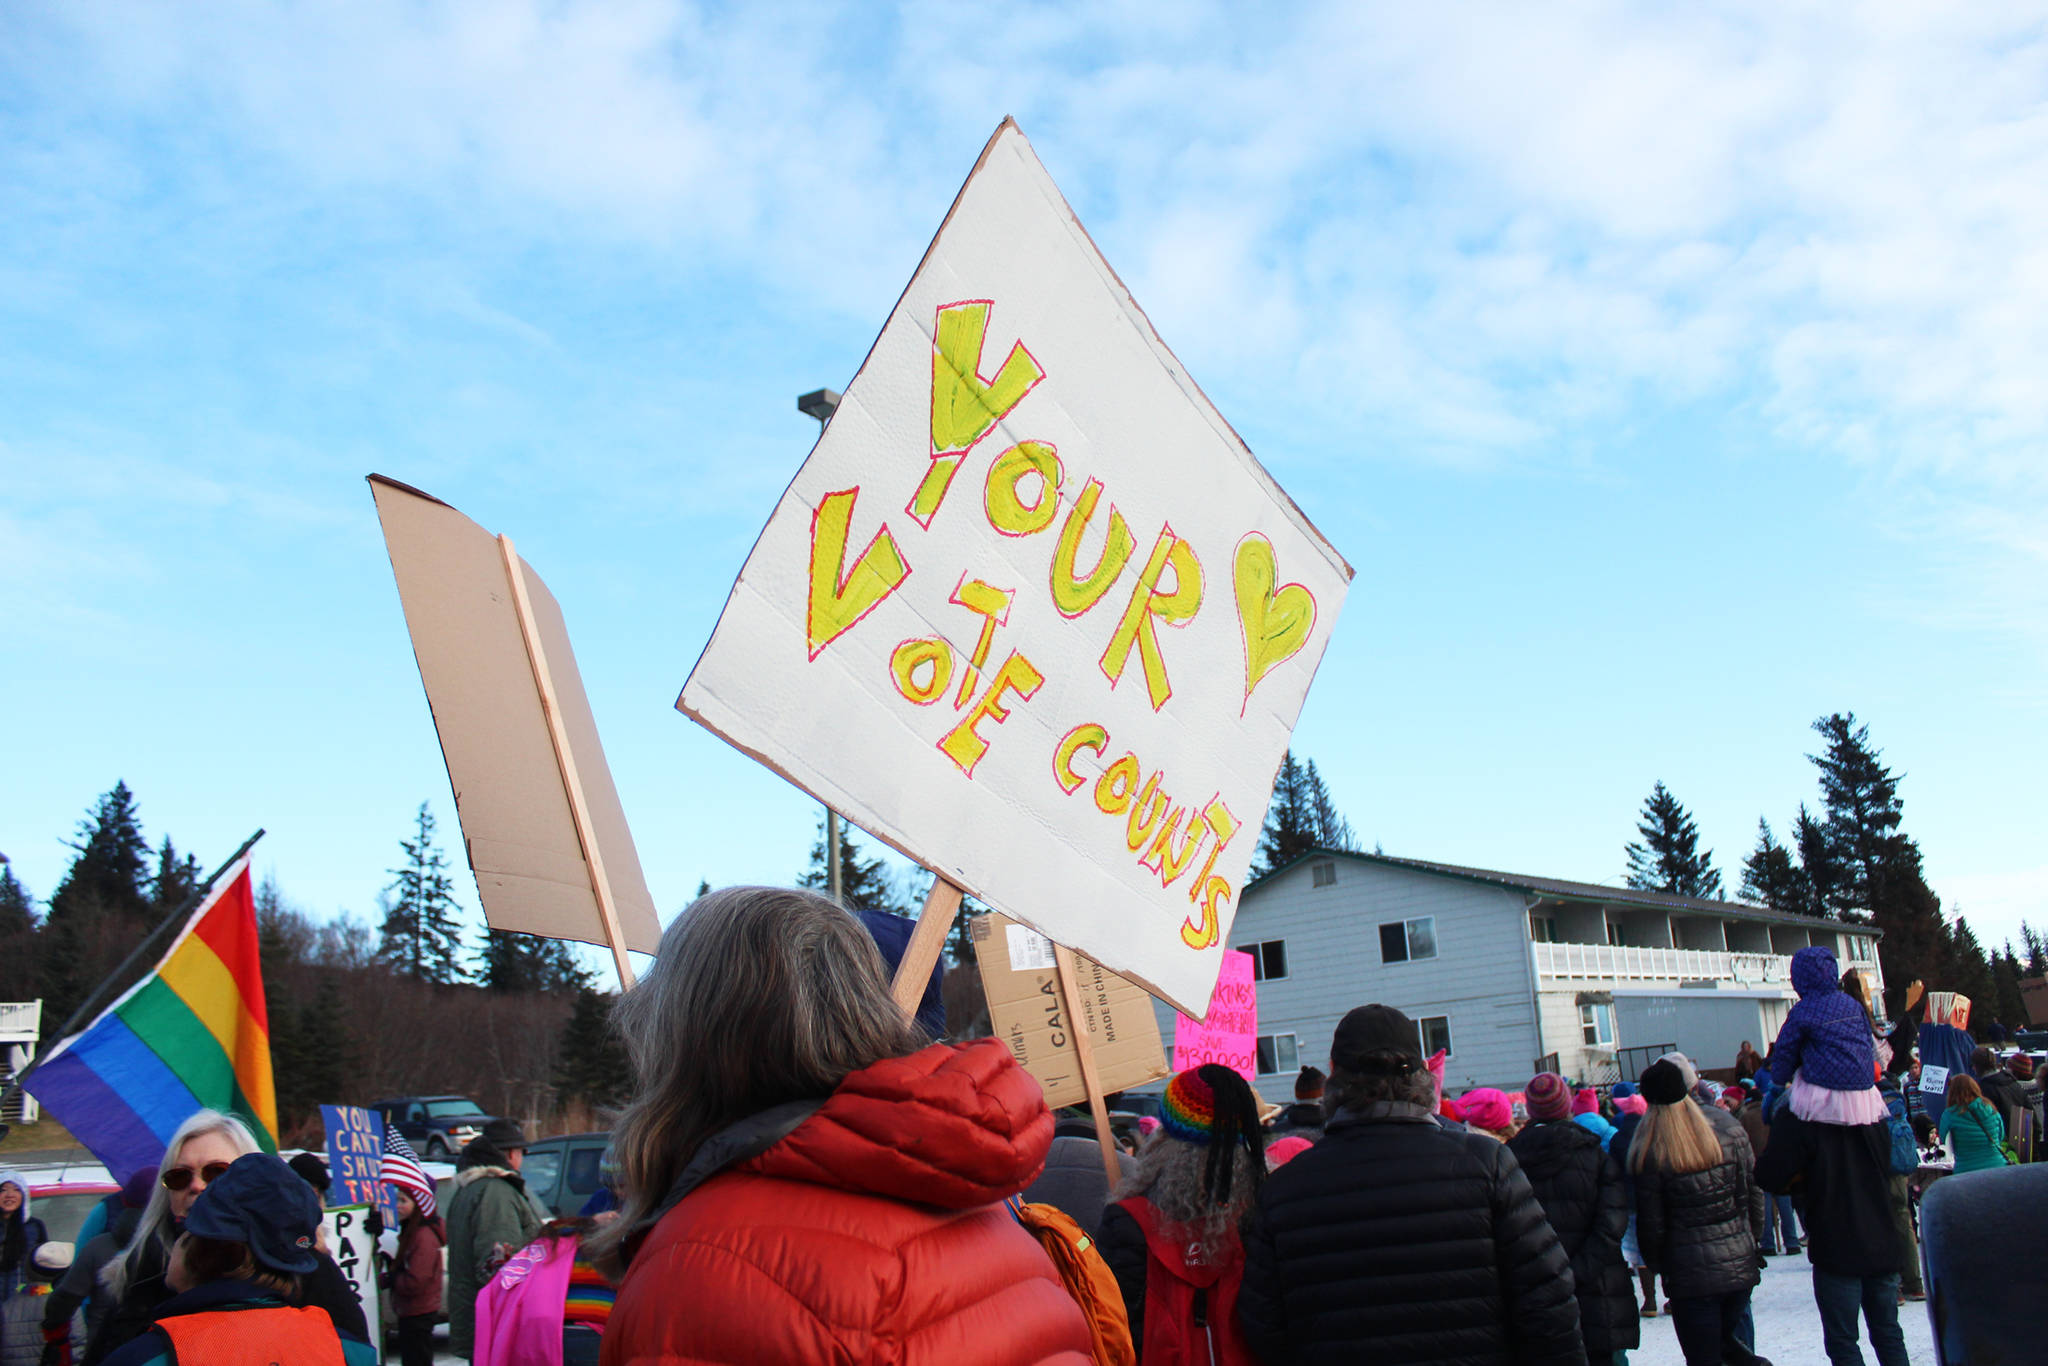 A sign reading “Your Vote Counts” is hoisted into the air as a crowd prepares to march in the HERC Building parking lot before the Women’s March on Homer 2018 on Saturday, Jan. 20, 2018 in Homer, Alaska. A major focus of this year’s march was voter registration. Registrars were set up to greet people at the end of the march in WKFL Park. (Photo by Megan Pacer/Homer News)